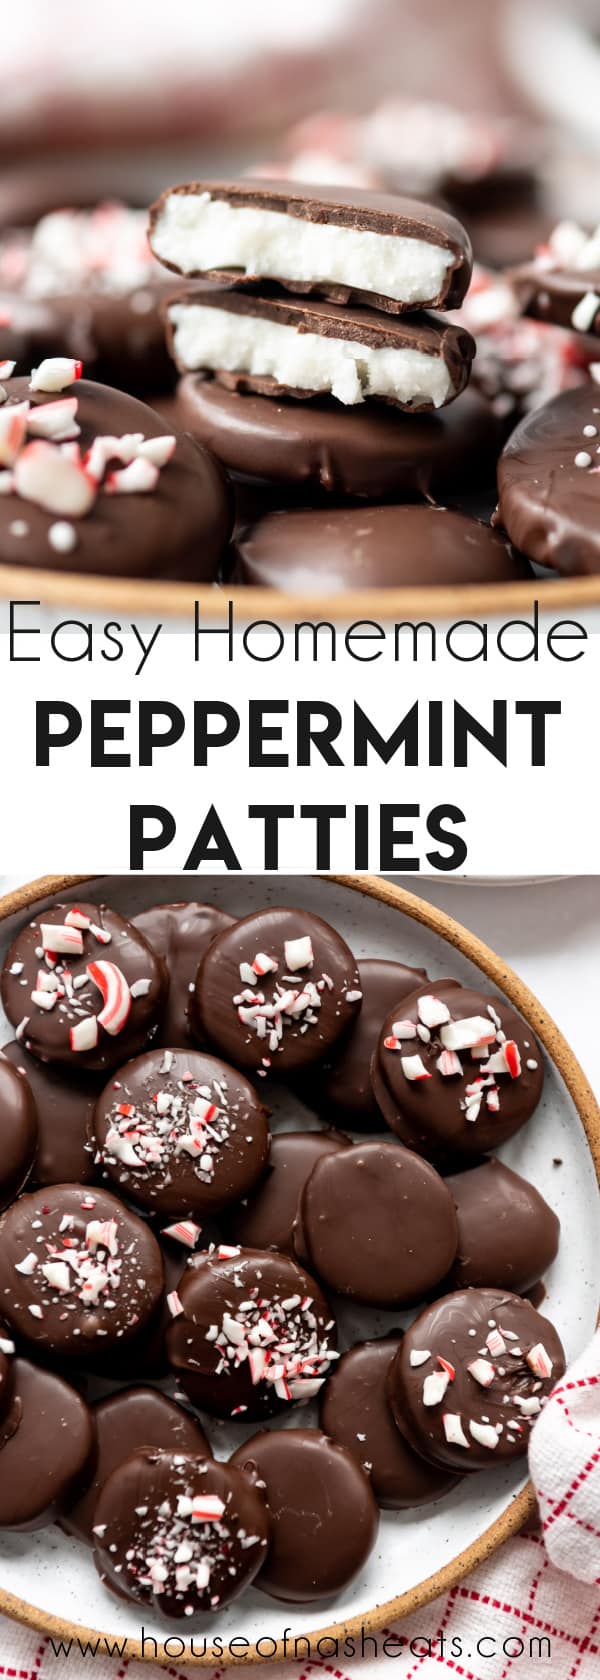 A collage of images of homemade peppermint patties with text overlay.